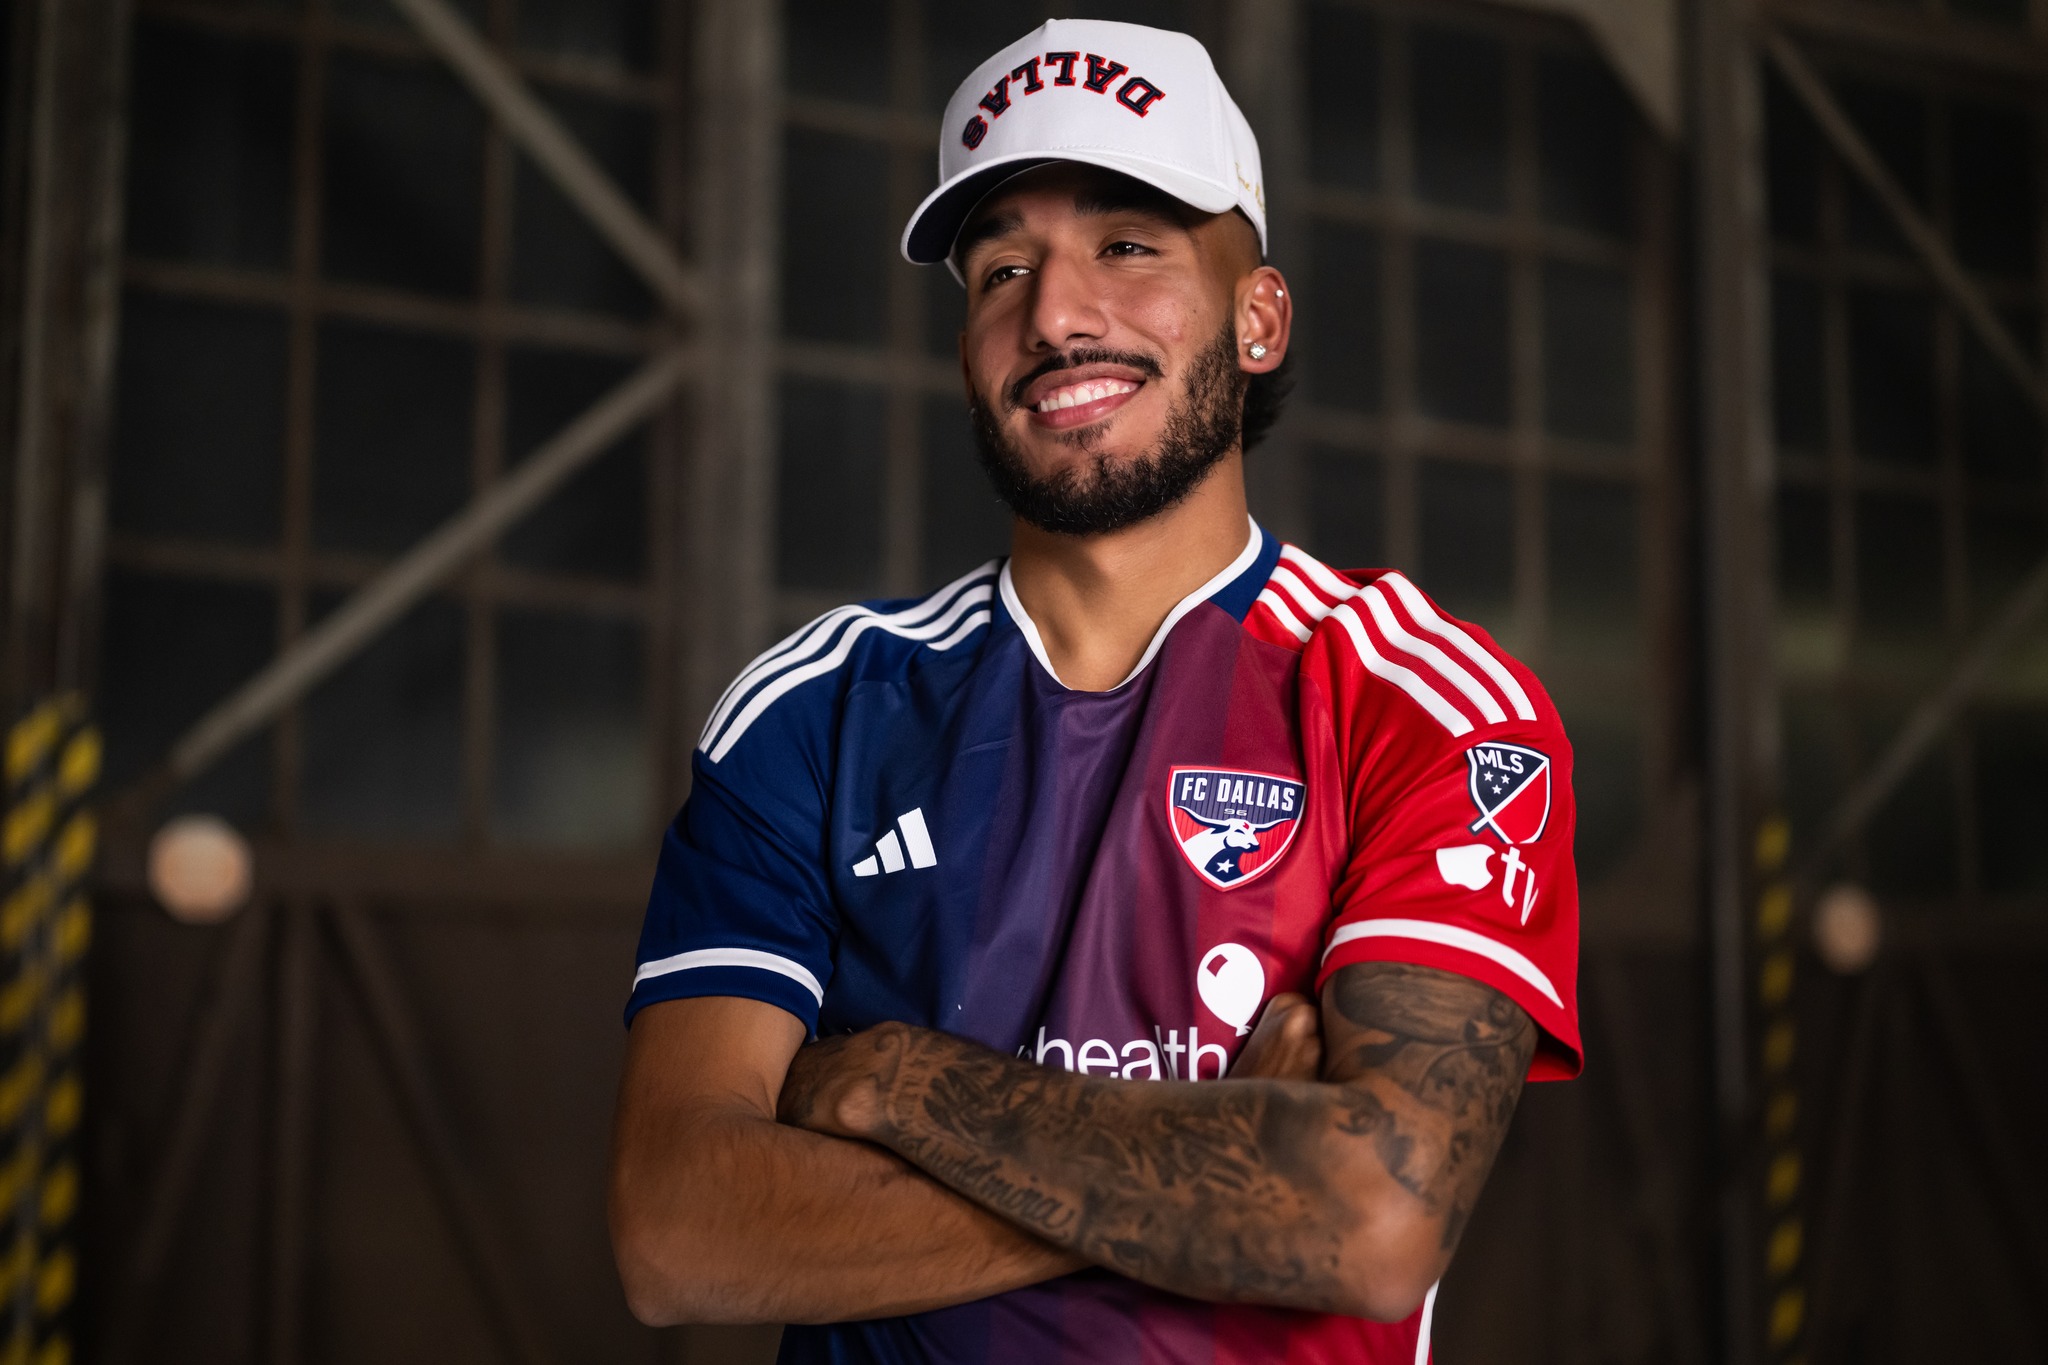 FC Dallas launched its Afterburner kit worn by Jesus Ferreira in a True Brvnd hat. (Courtesy FC Dallas)